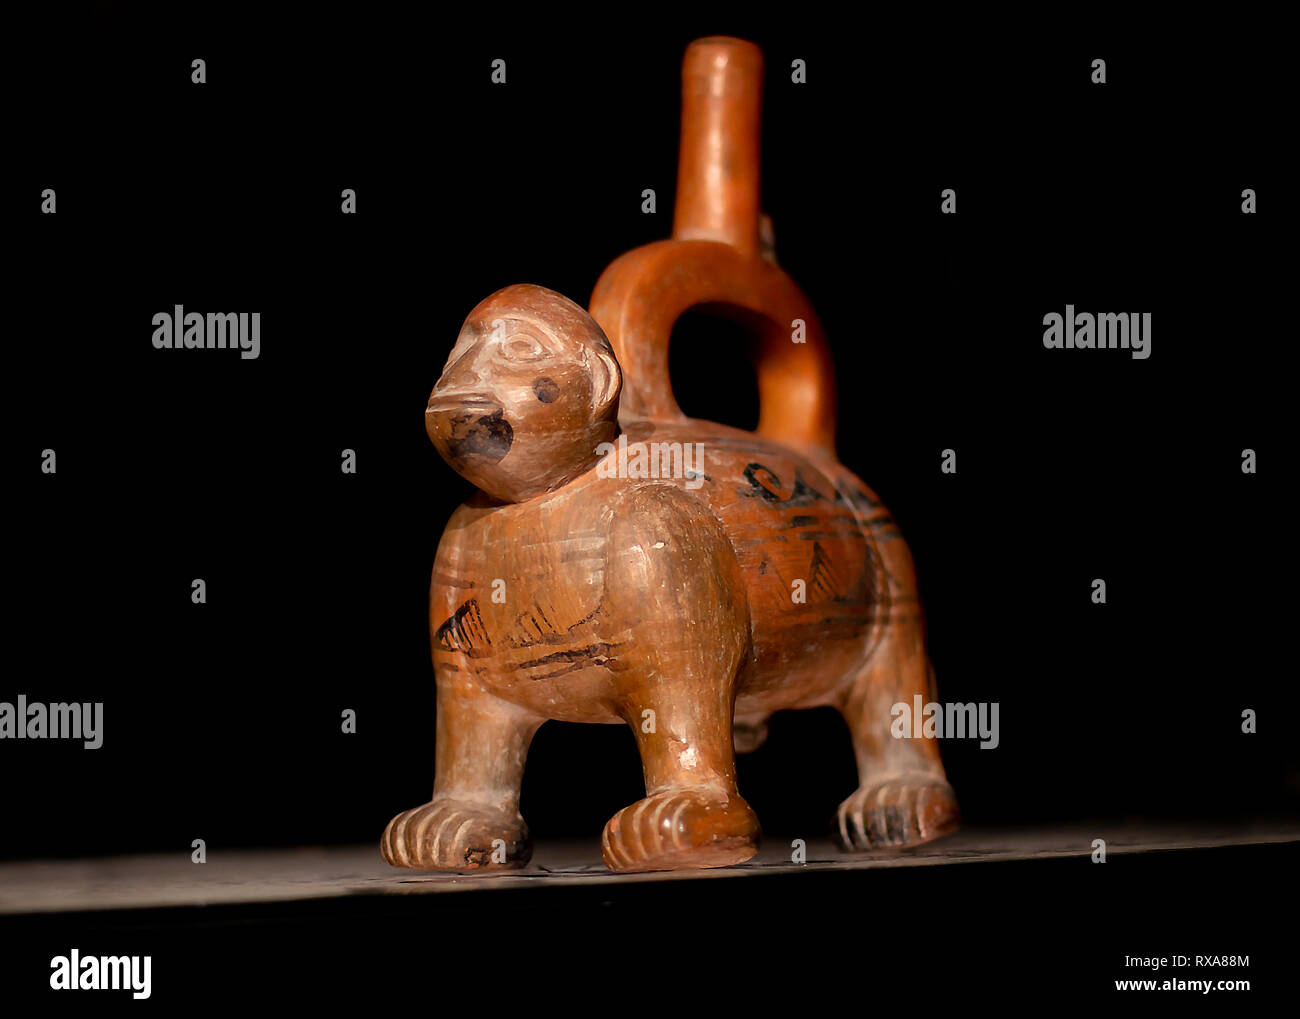 Precolombian ceramics called 'Huacos' from Chancay, a Peruvian culture. Private collection of pre inca pottery. Stock Photo